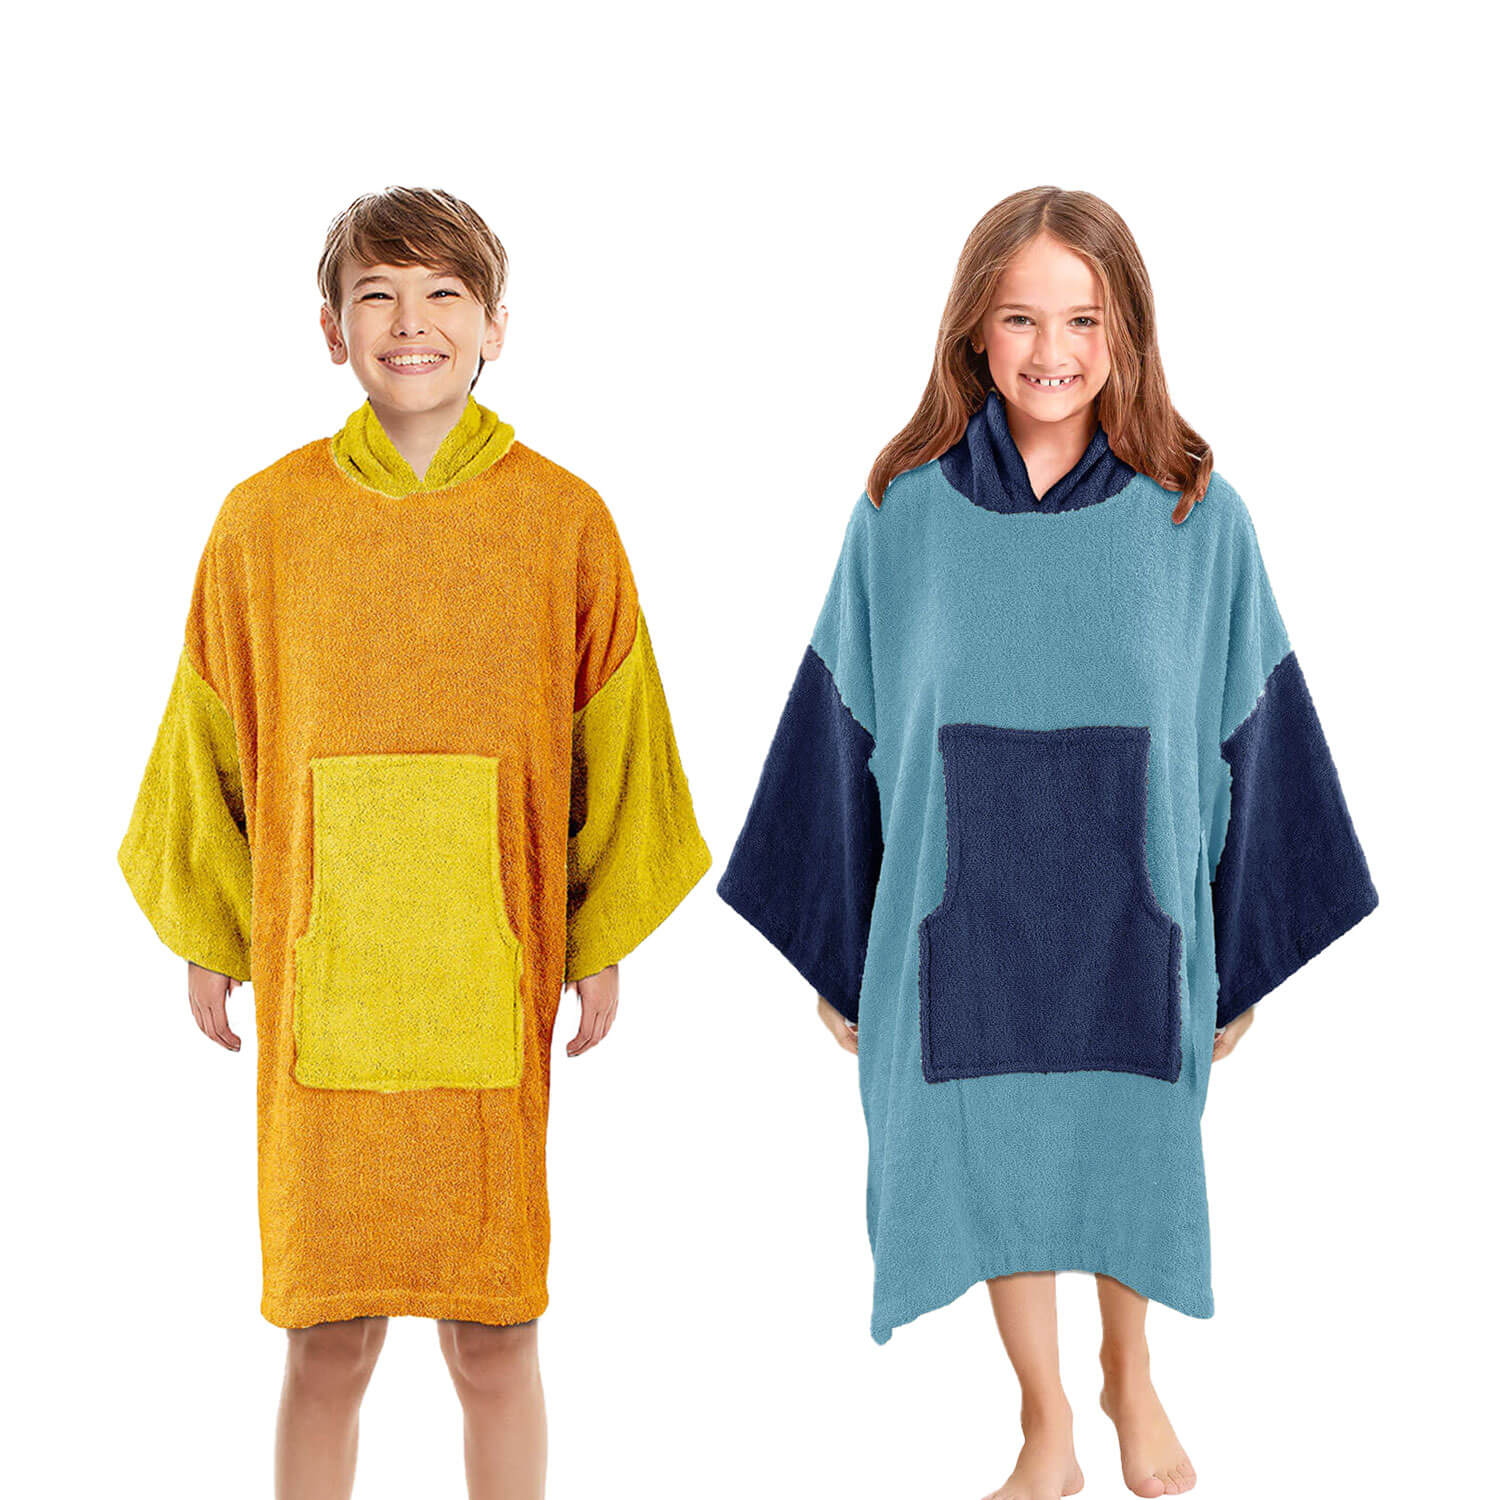 The Home Collection Kids Long Sleeve Poncho Towel - 100% Cotton 1 Shaws Department Stores